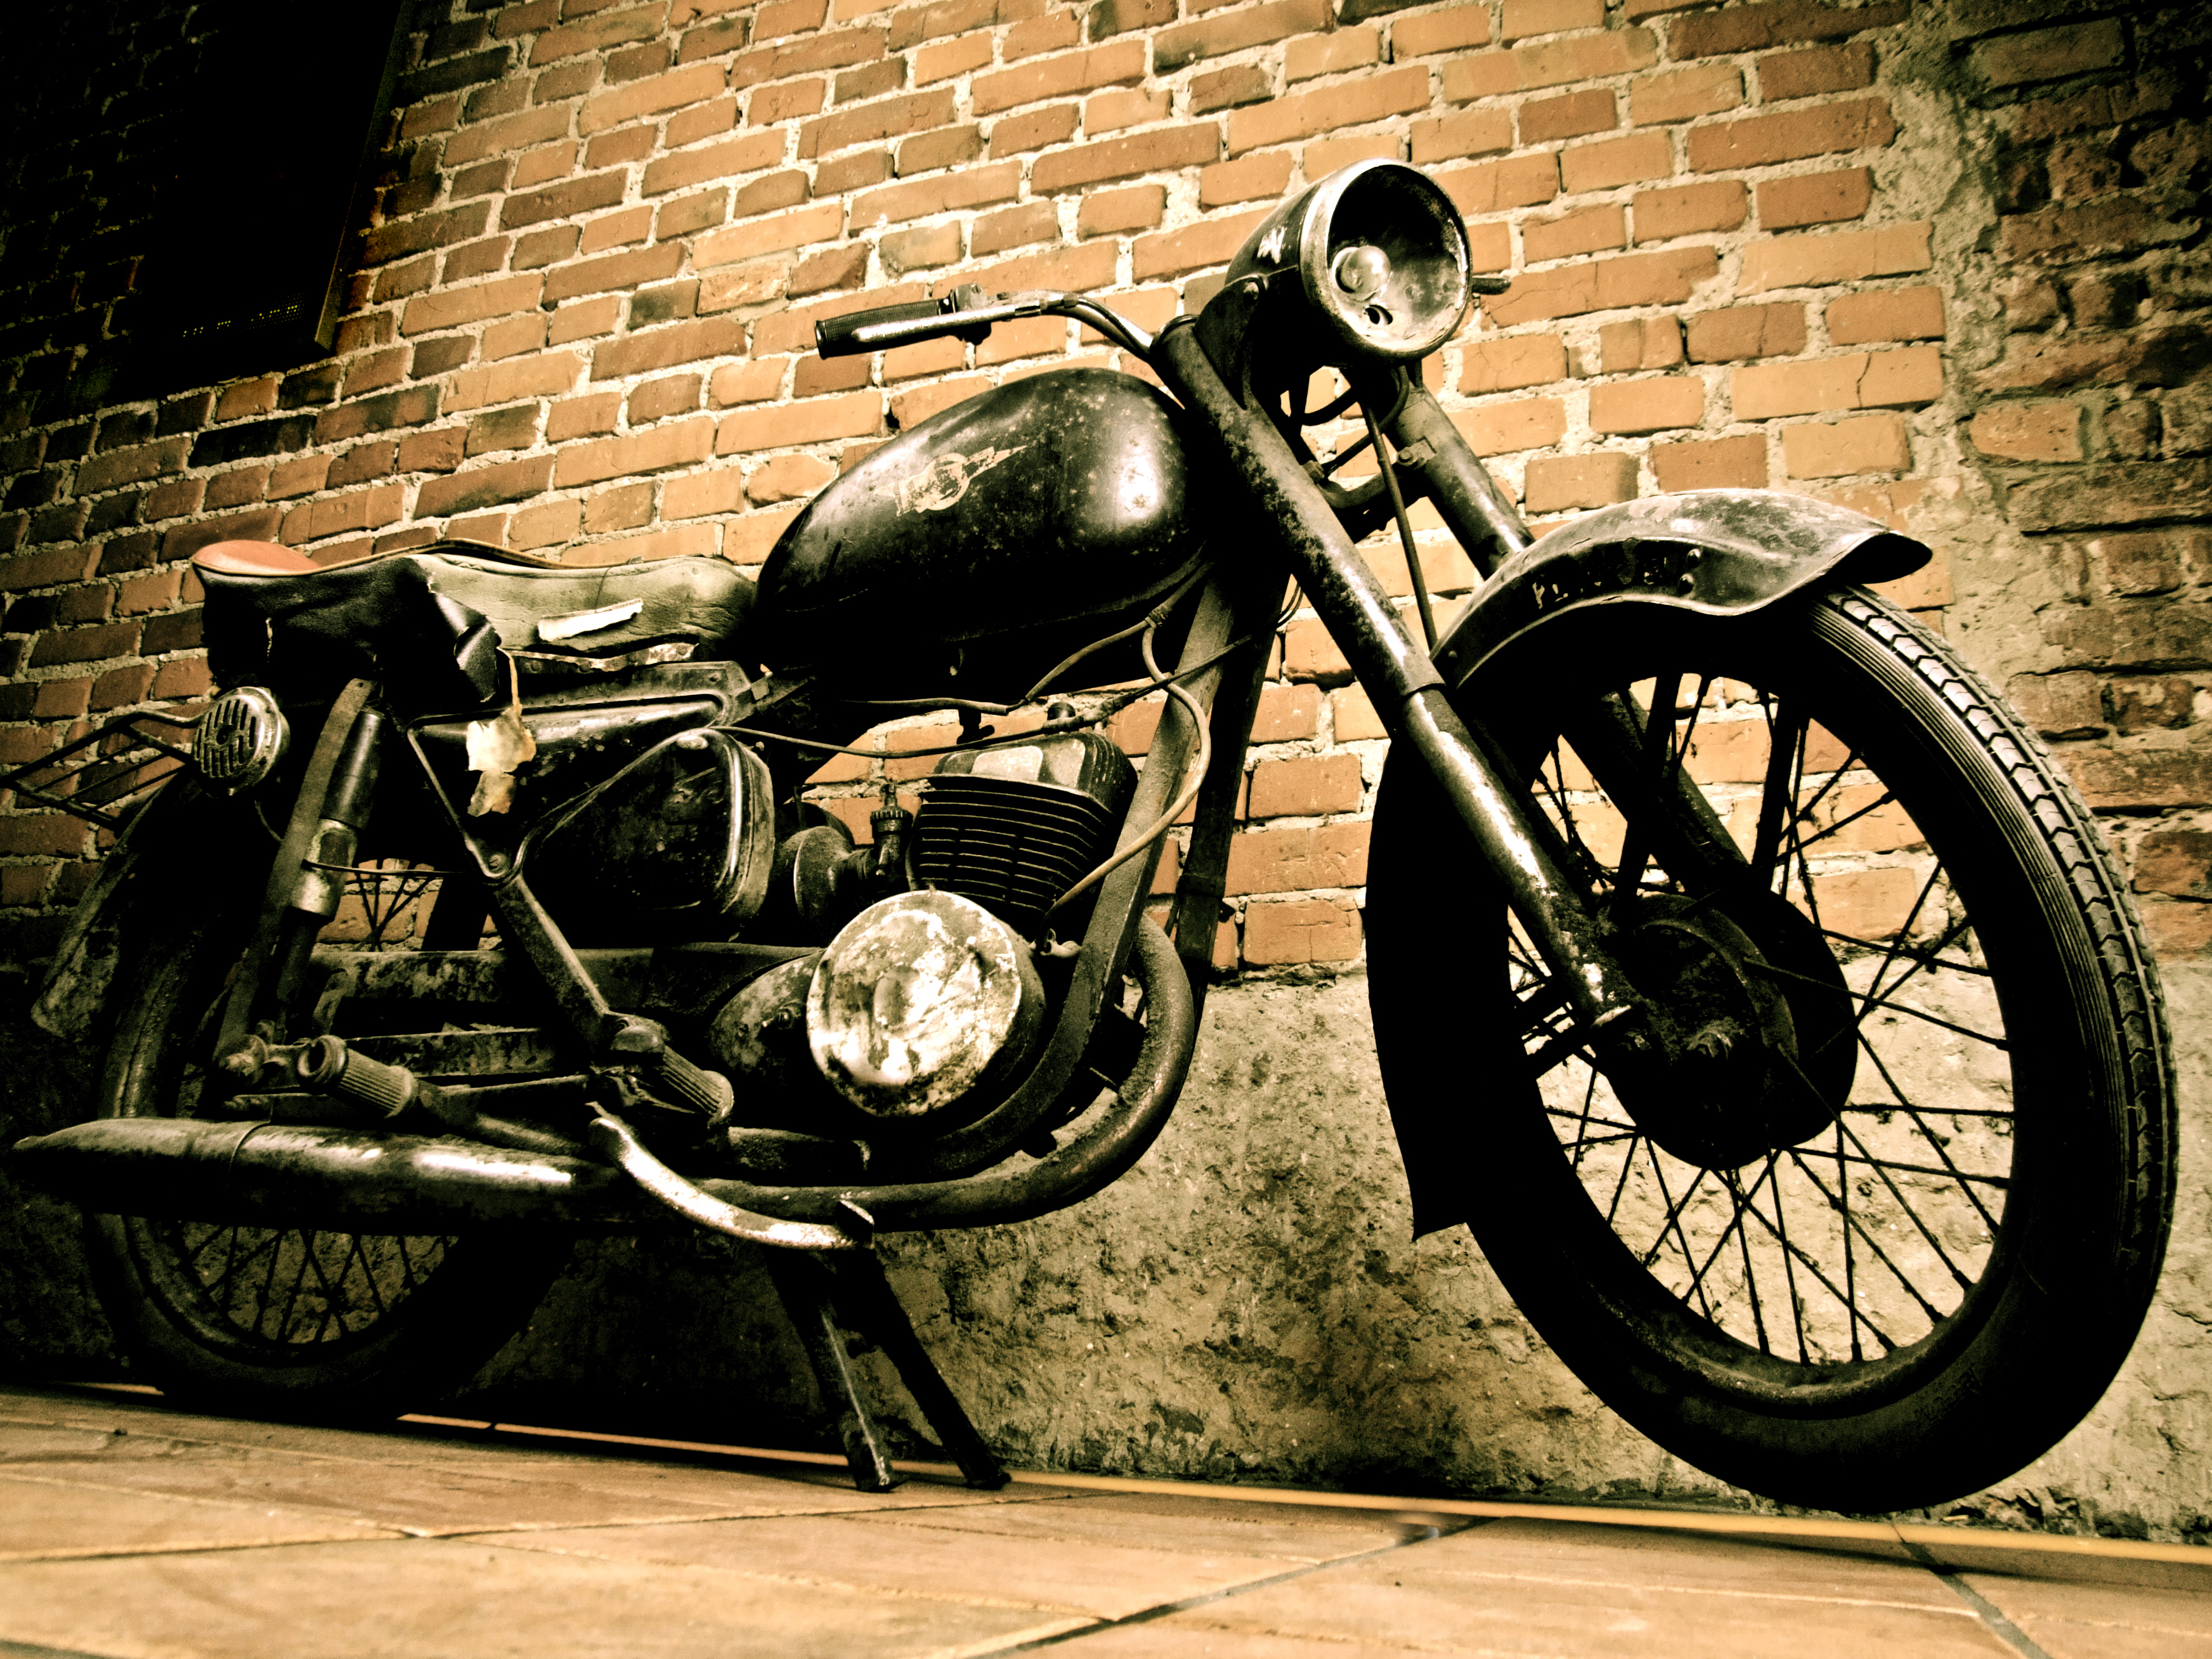 Old Fashion Motorcycles